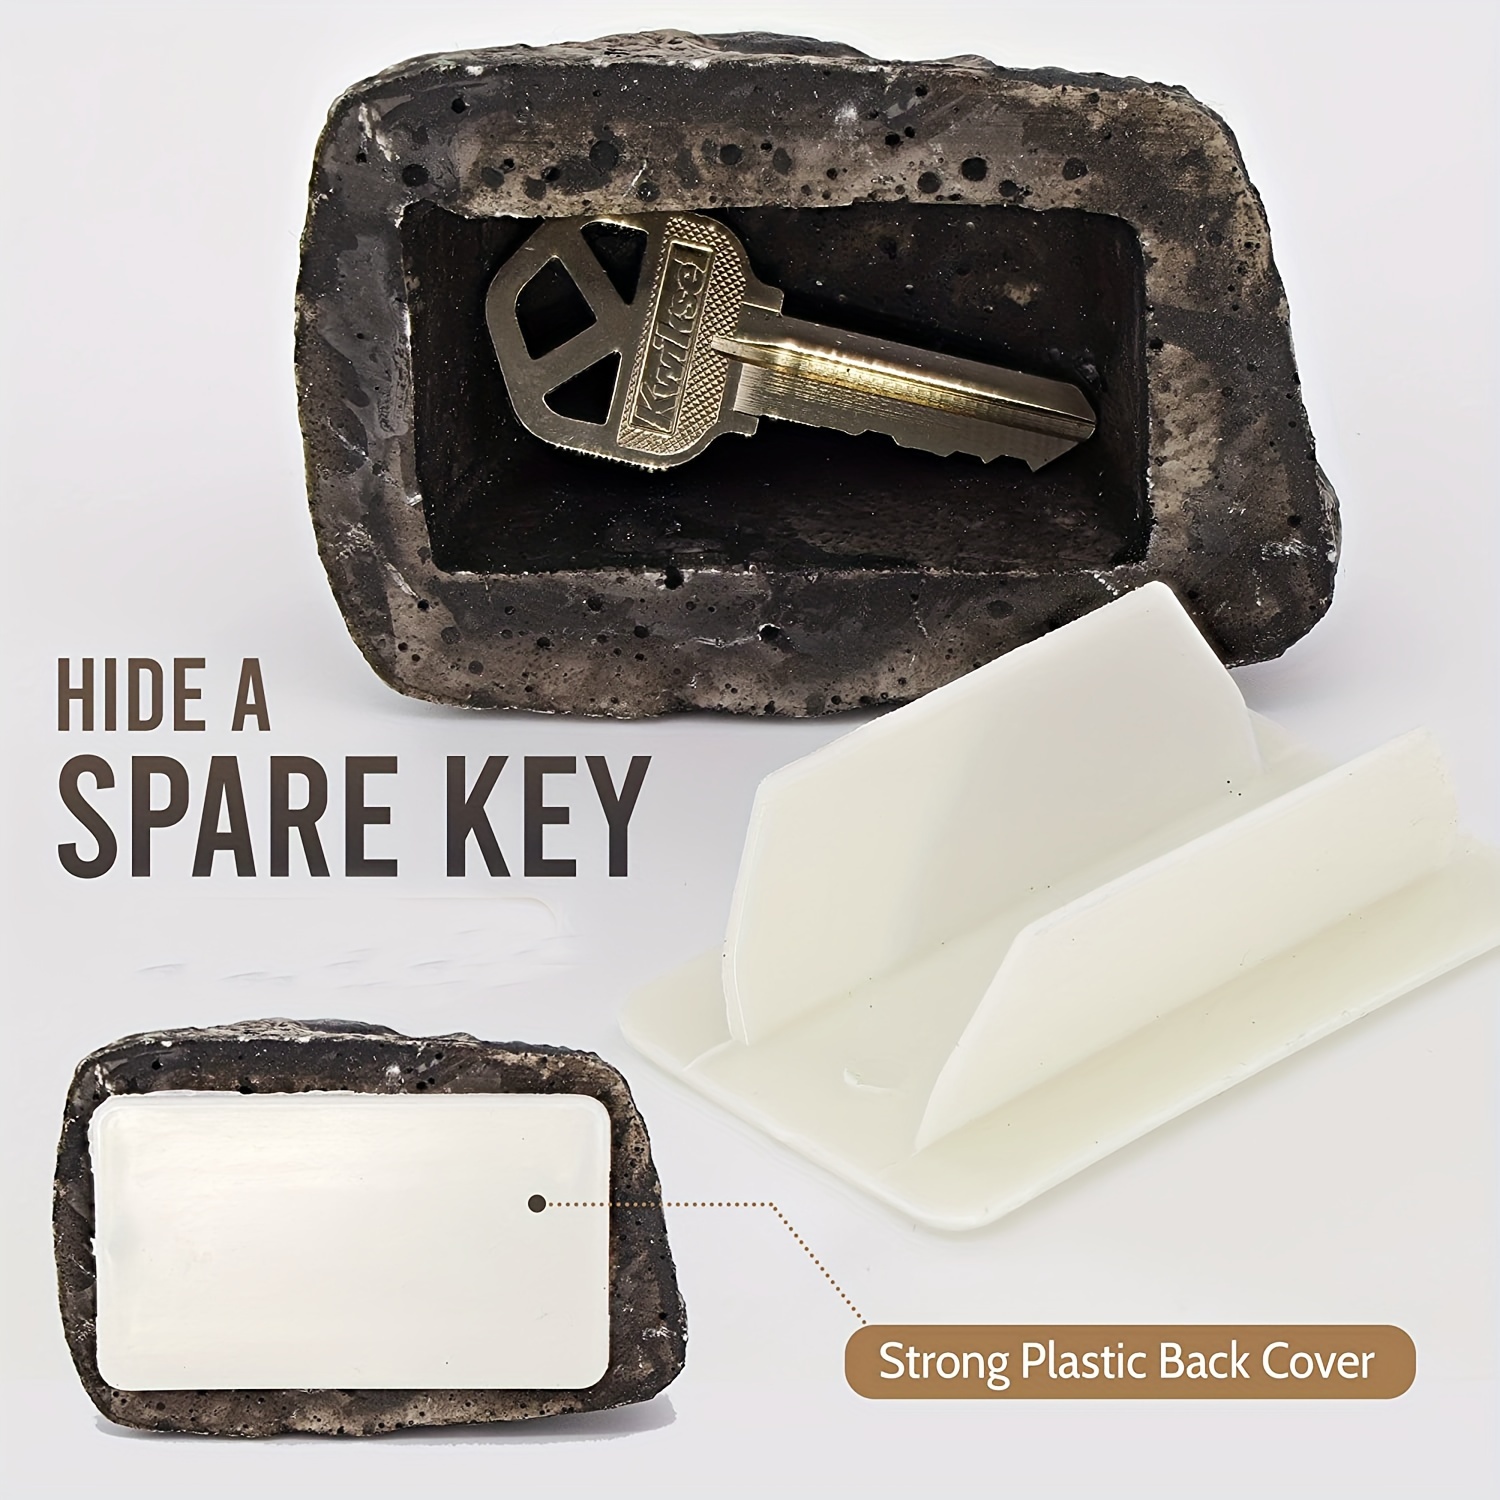 1pc Fake Stone Key Hider, Decorative Stone Shaped Spare Key Case, Never Get  Locked Out Again, Outdoor Furniture Supplies